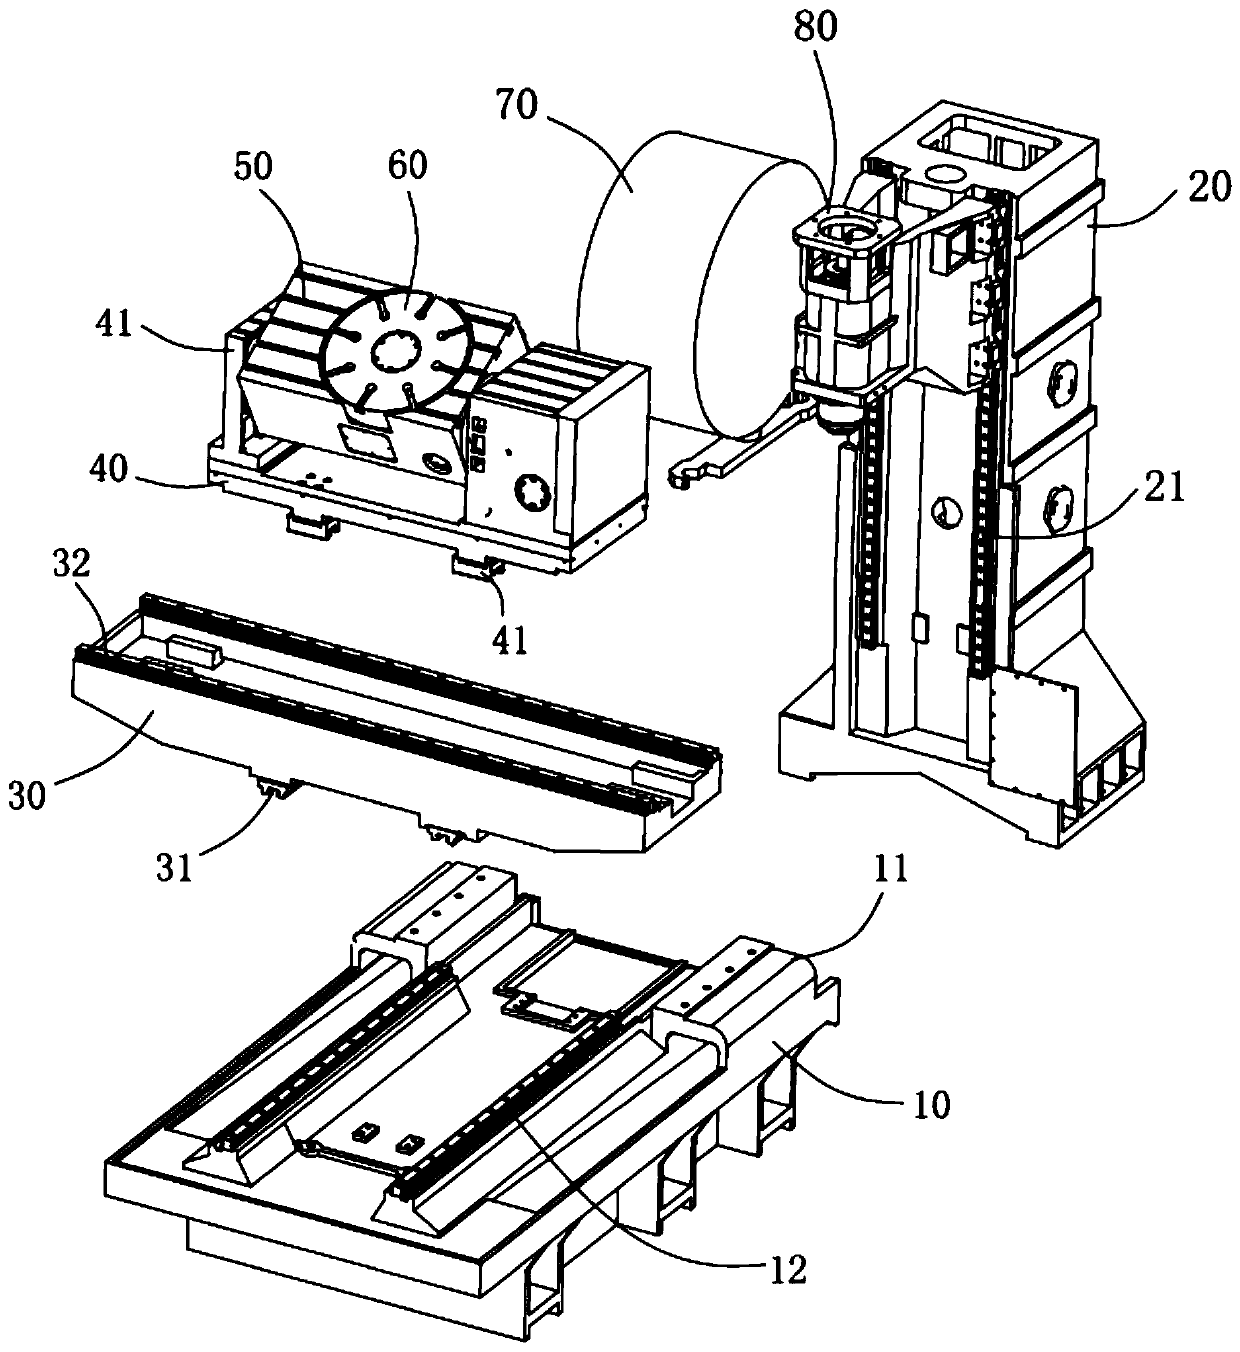 Efficient polyhedron processing machine tool